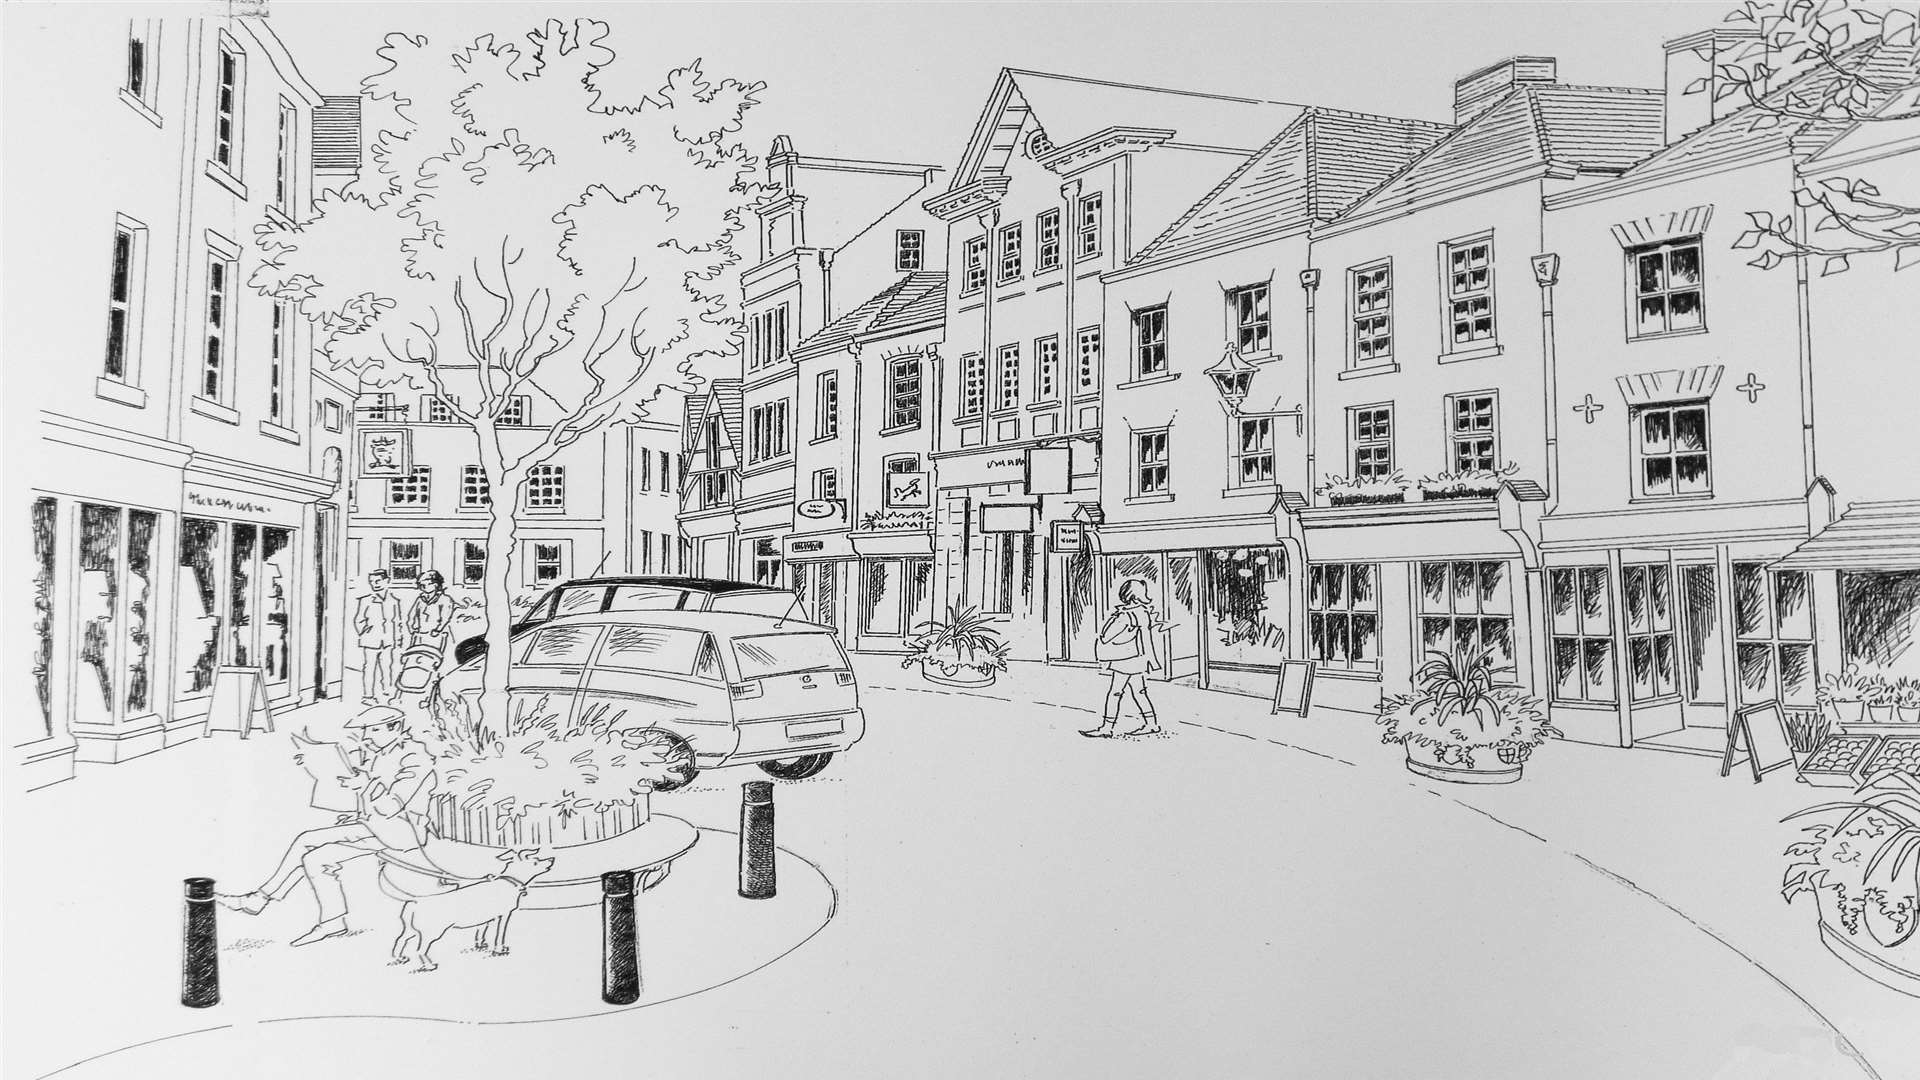 Sandwich Town Team's artistic impression of how Market Street would look after the improvements